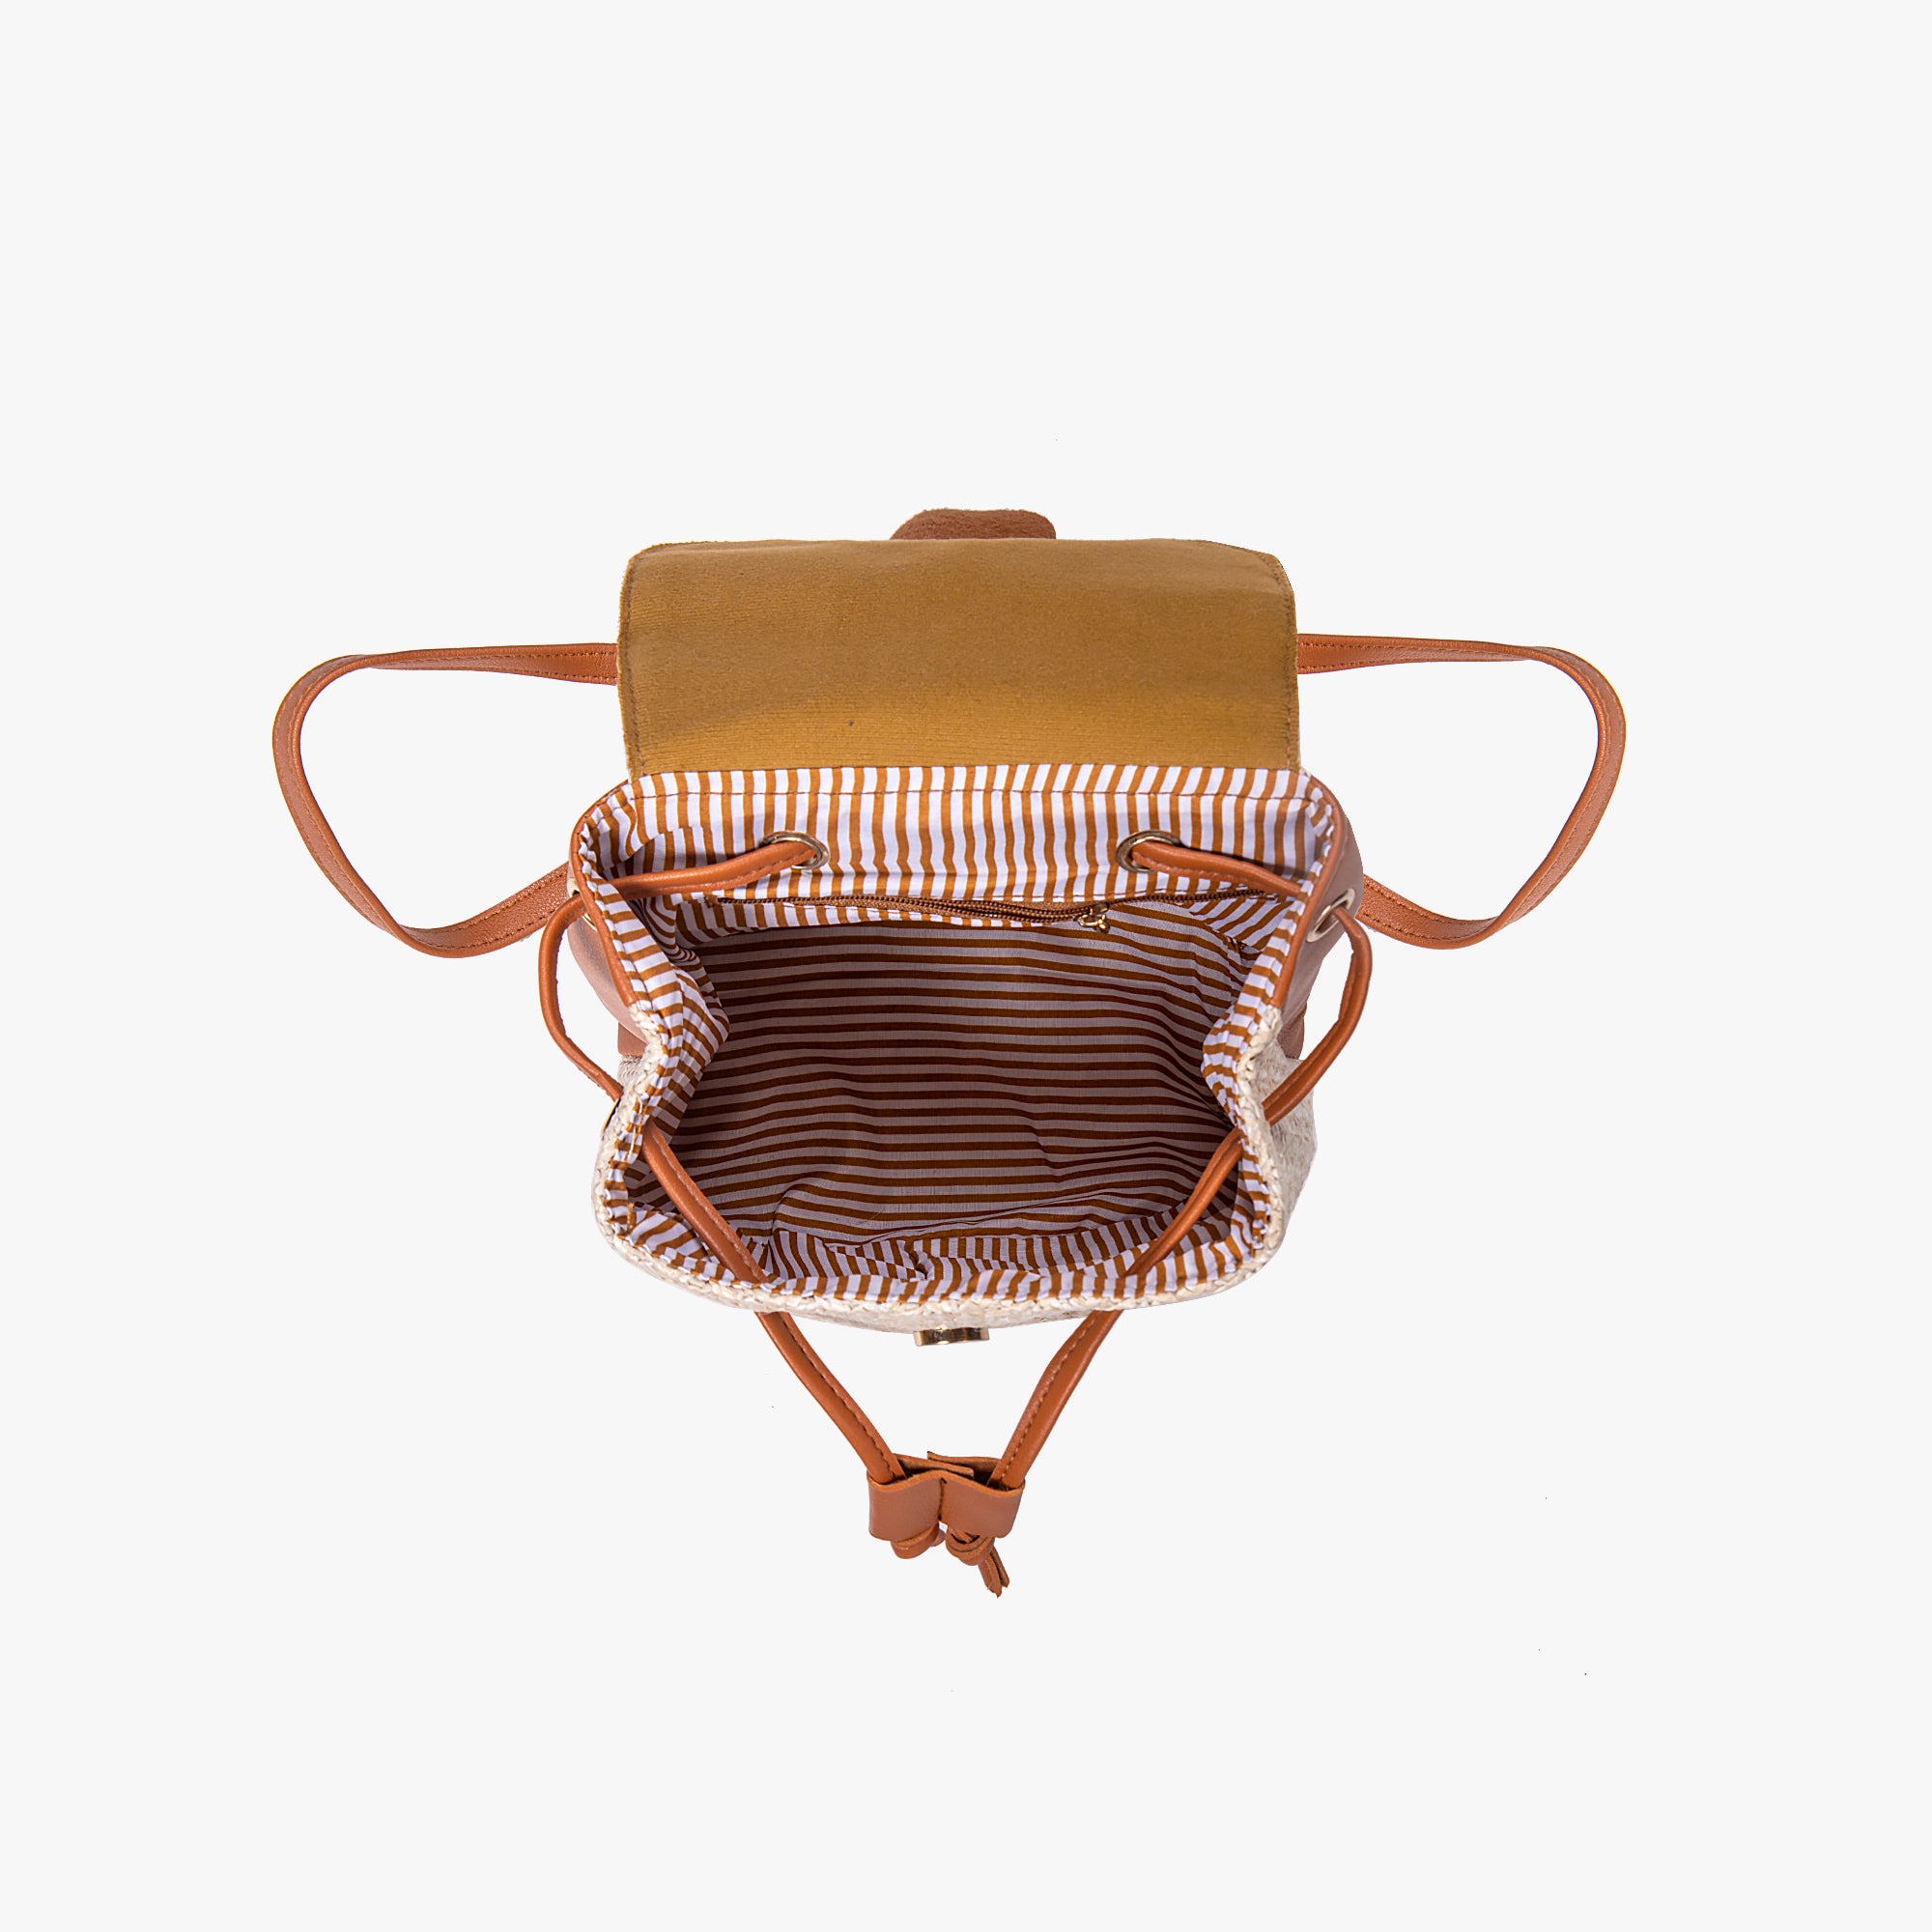 Buckle Straw Backpack